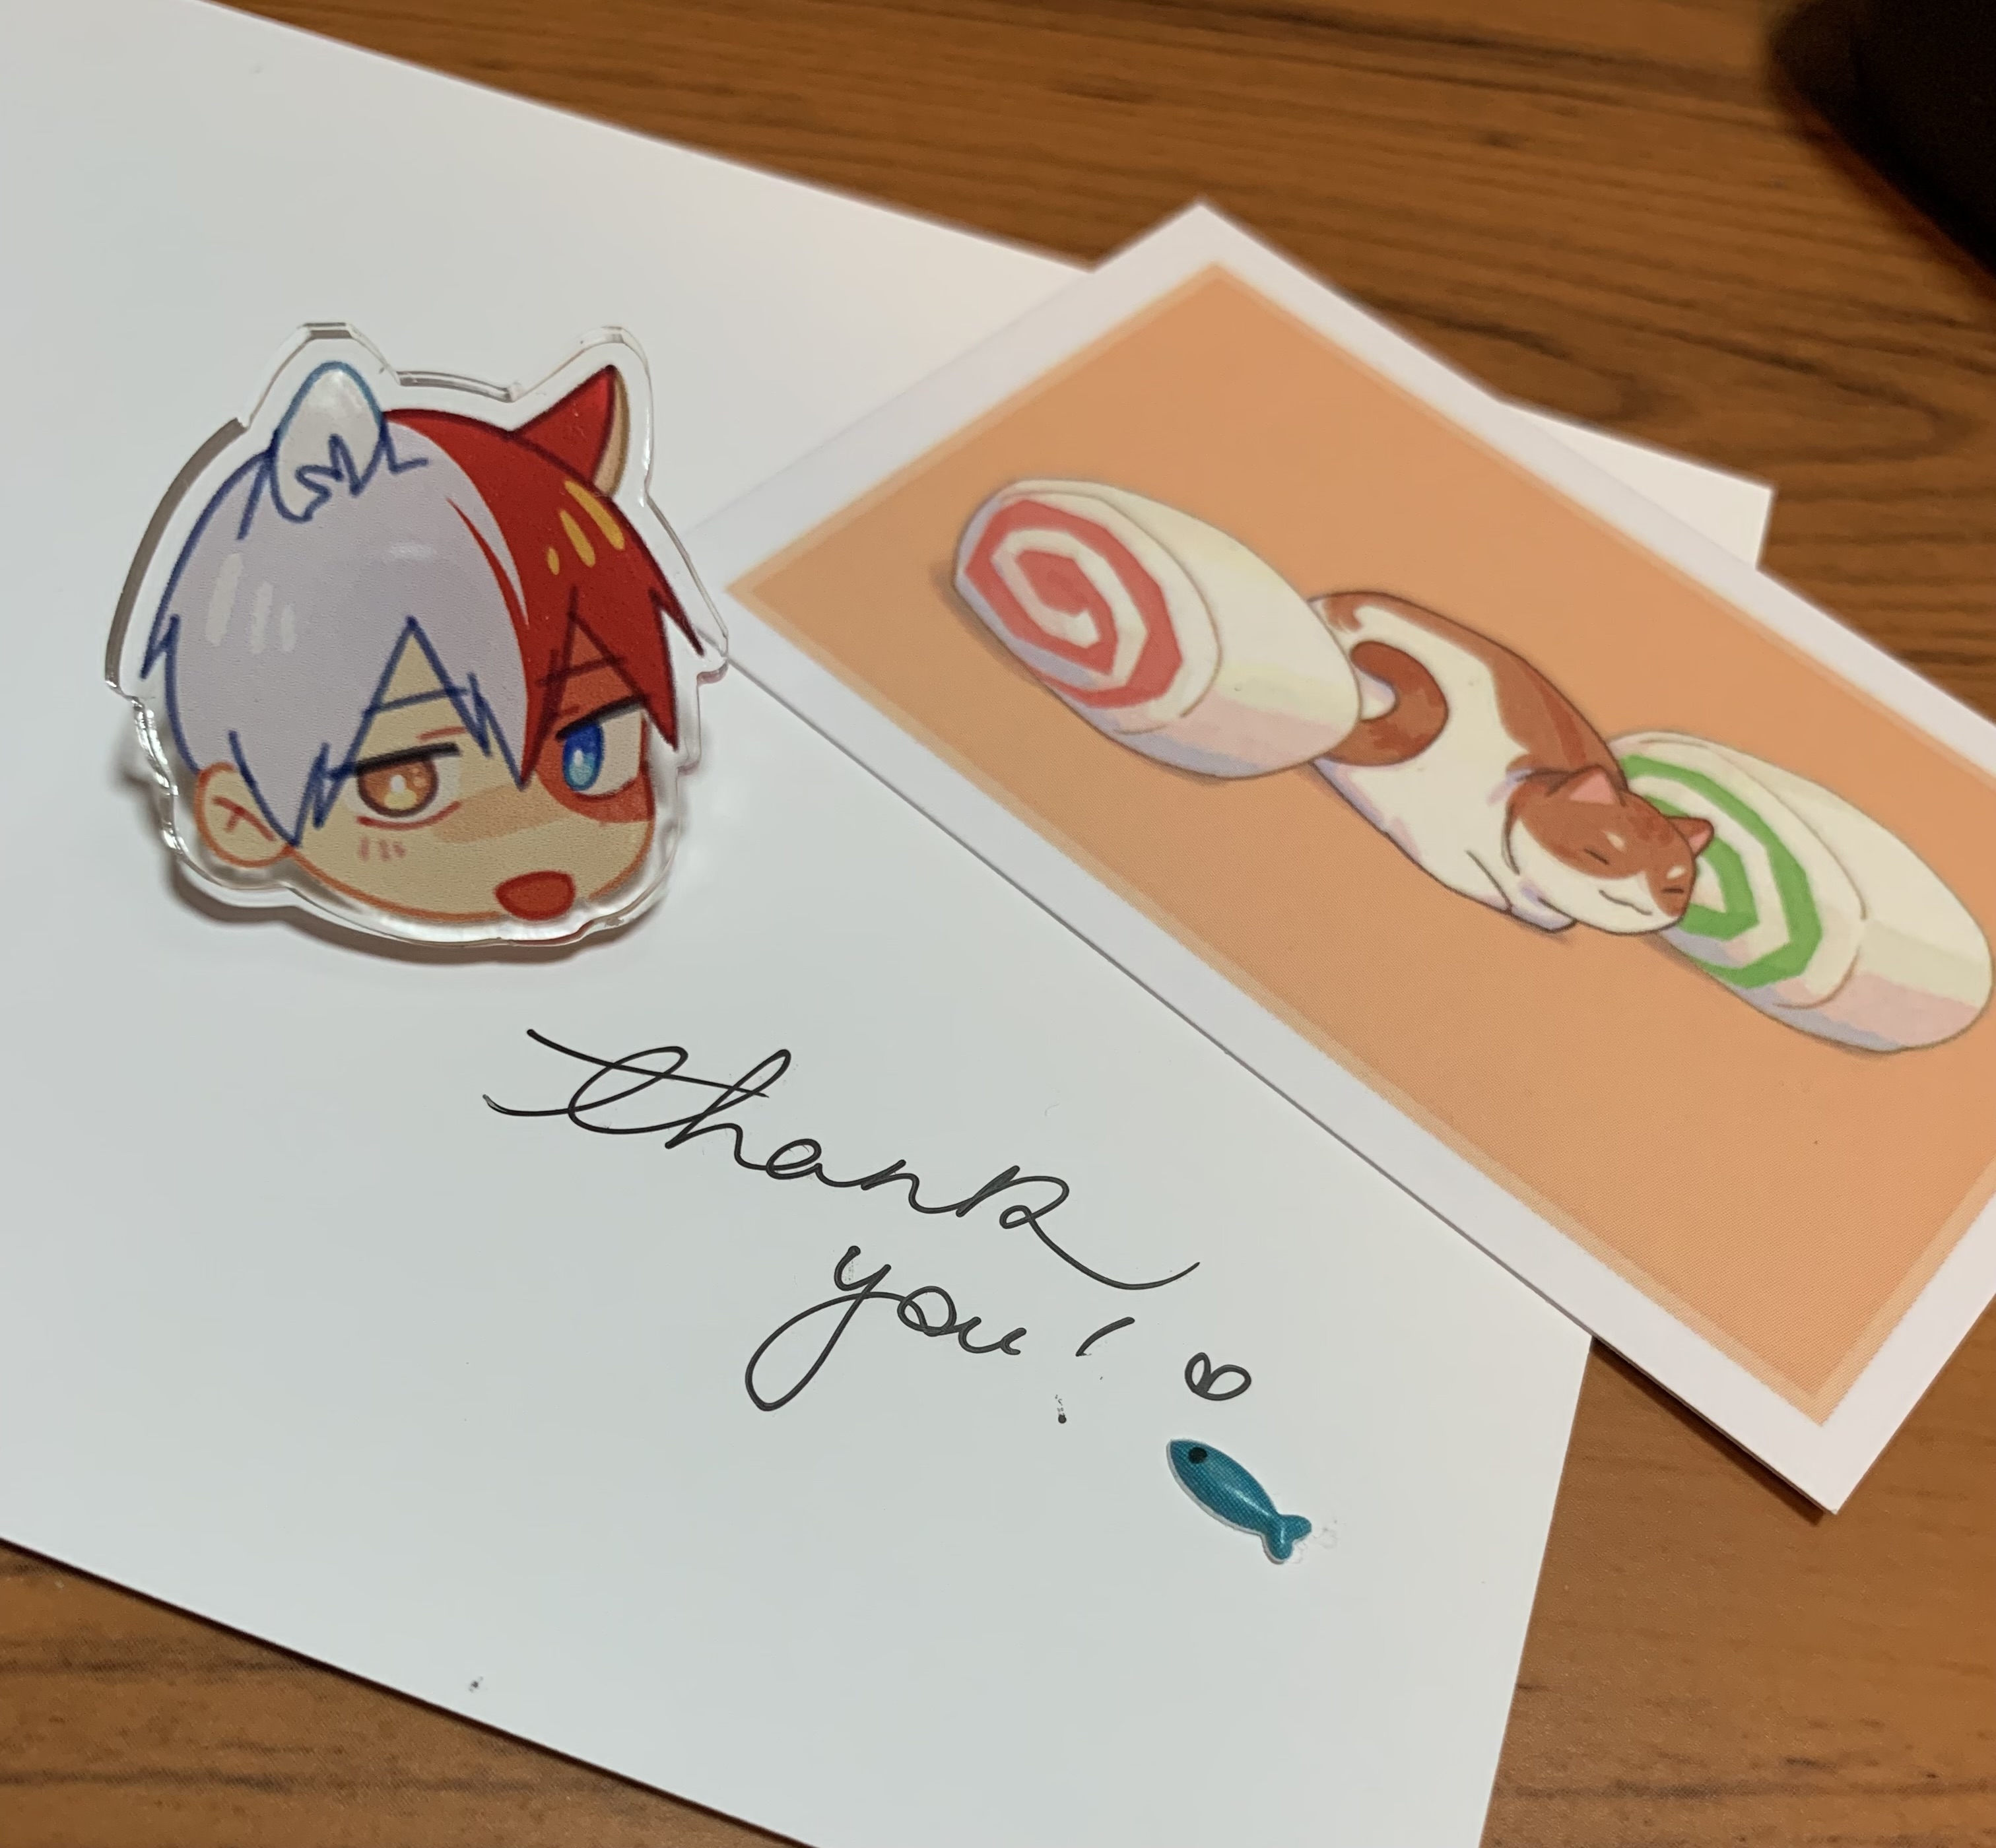 my photo of a cat todoroki blep pin from boku no hero academia, drawn by thatmightyheart from tumblr/twitter, along with a card that says 'thank you!' with a little heart and fish next to it and another card with a cat between two swiss roll cakes